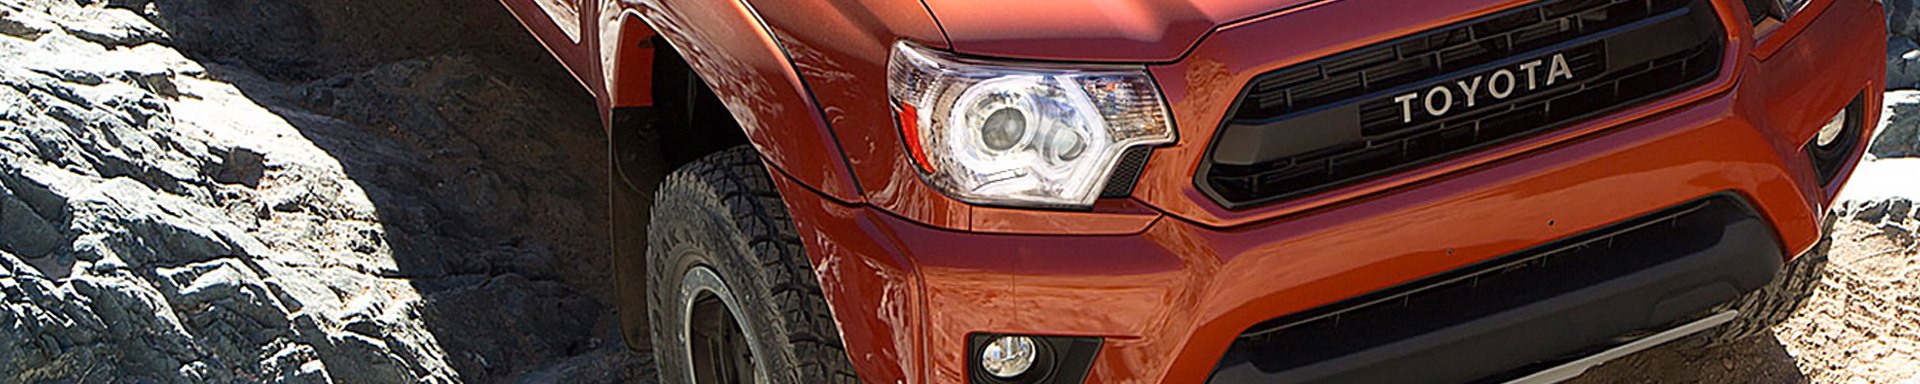 Now You Can Upgrade Your Toyota Tacoma with New Projector Headlights by Lumen